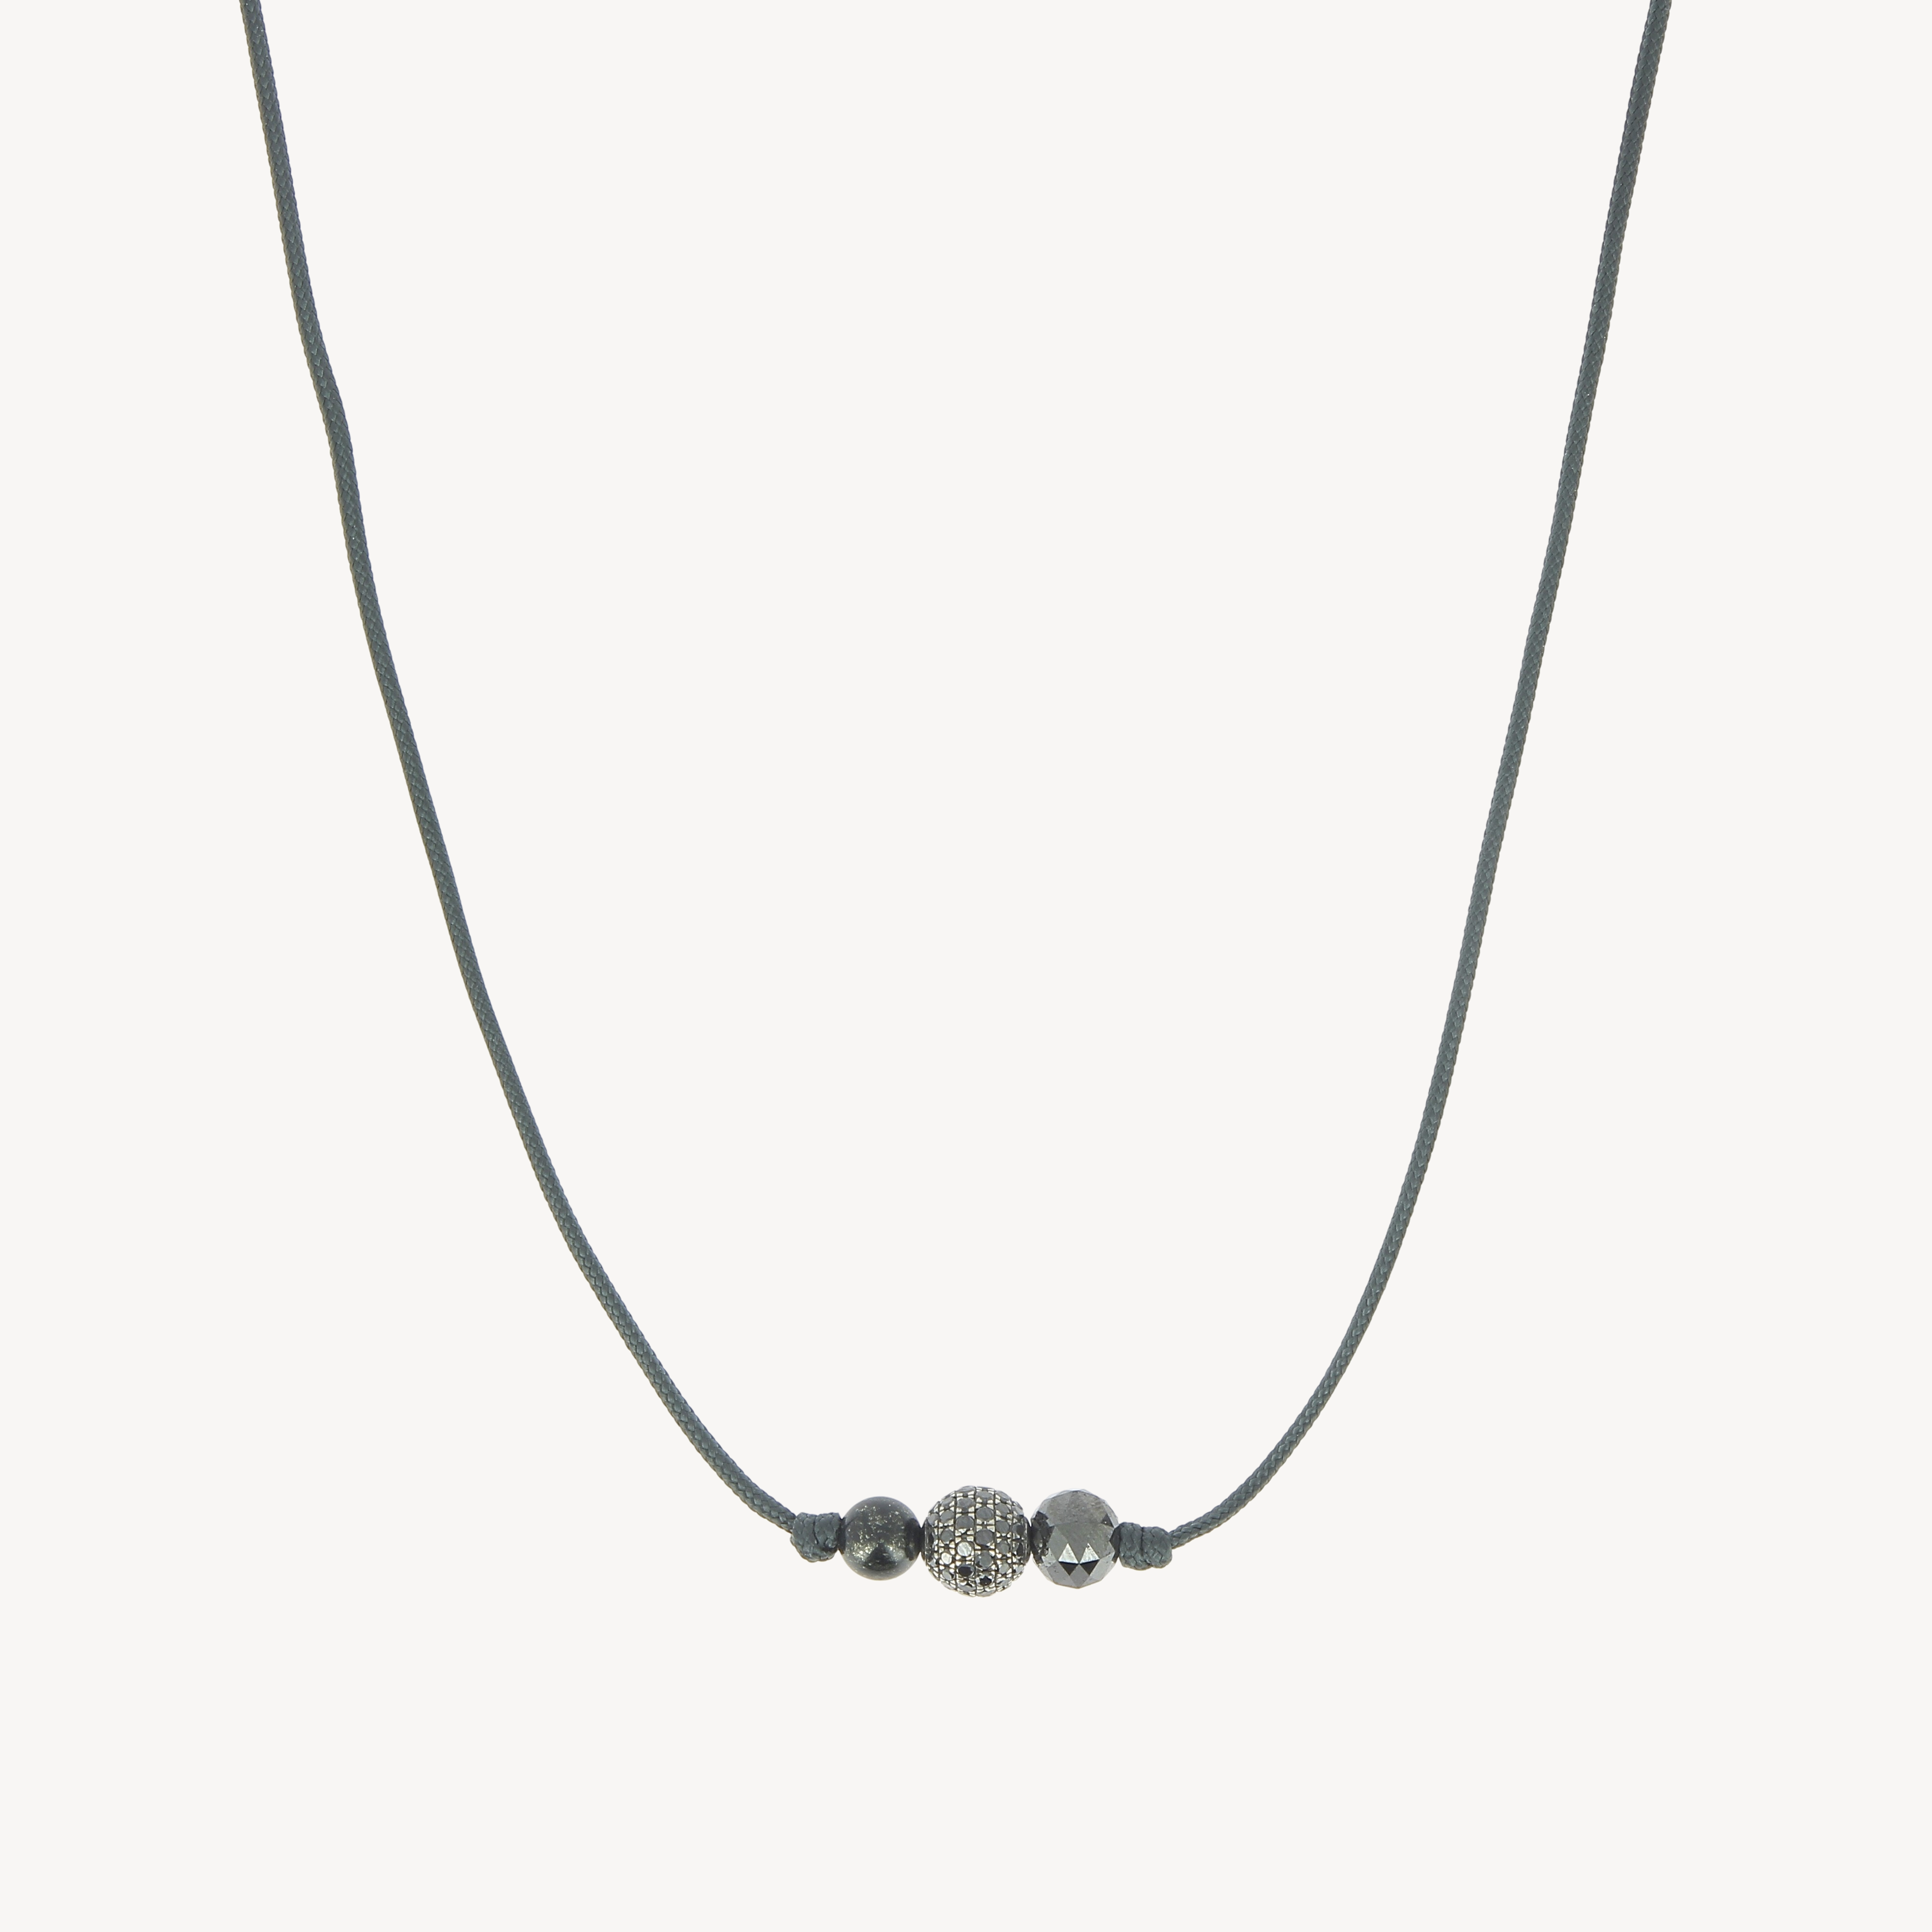 Faceted Black Diamond Necklace